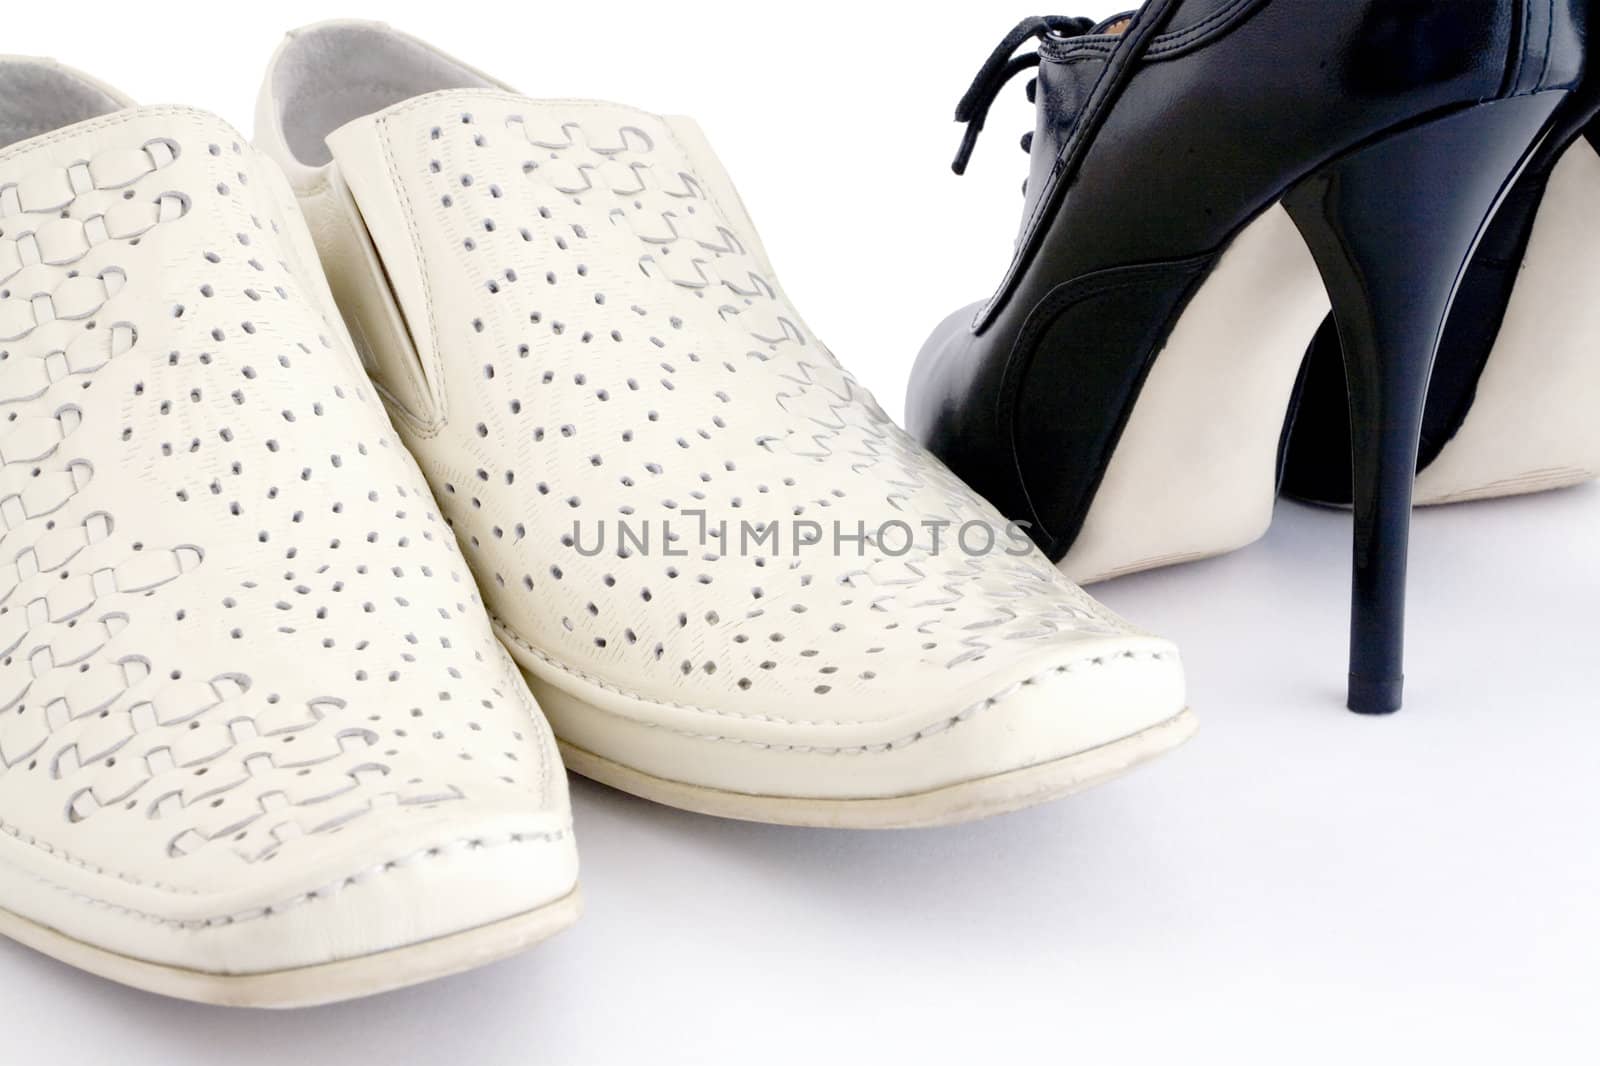 Man's and woman's leather shoes on a white background